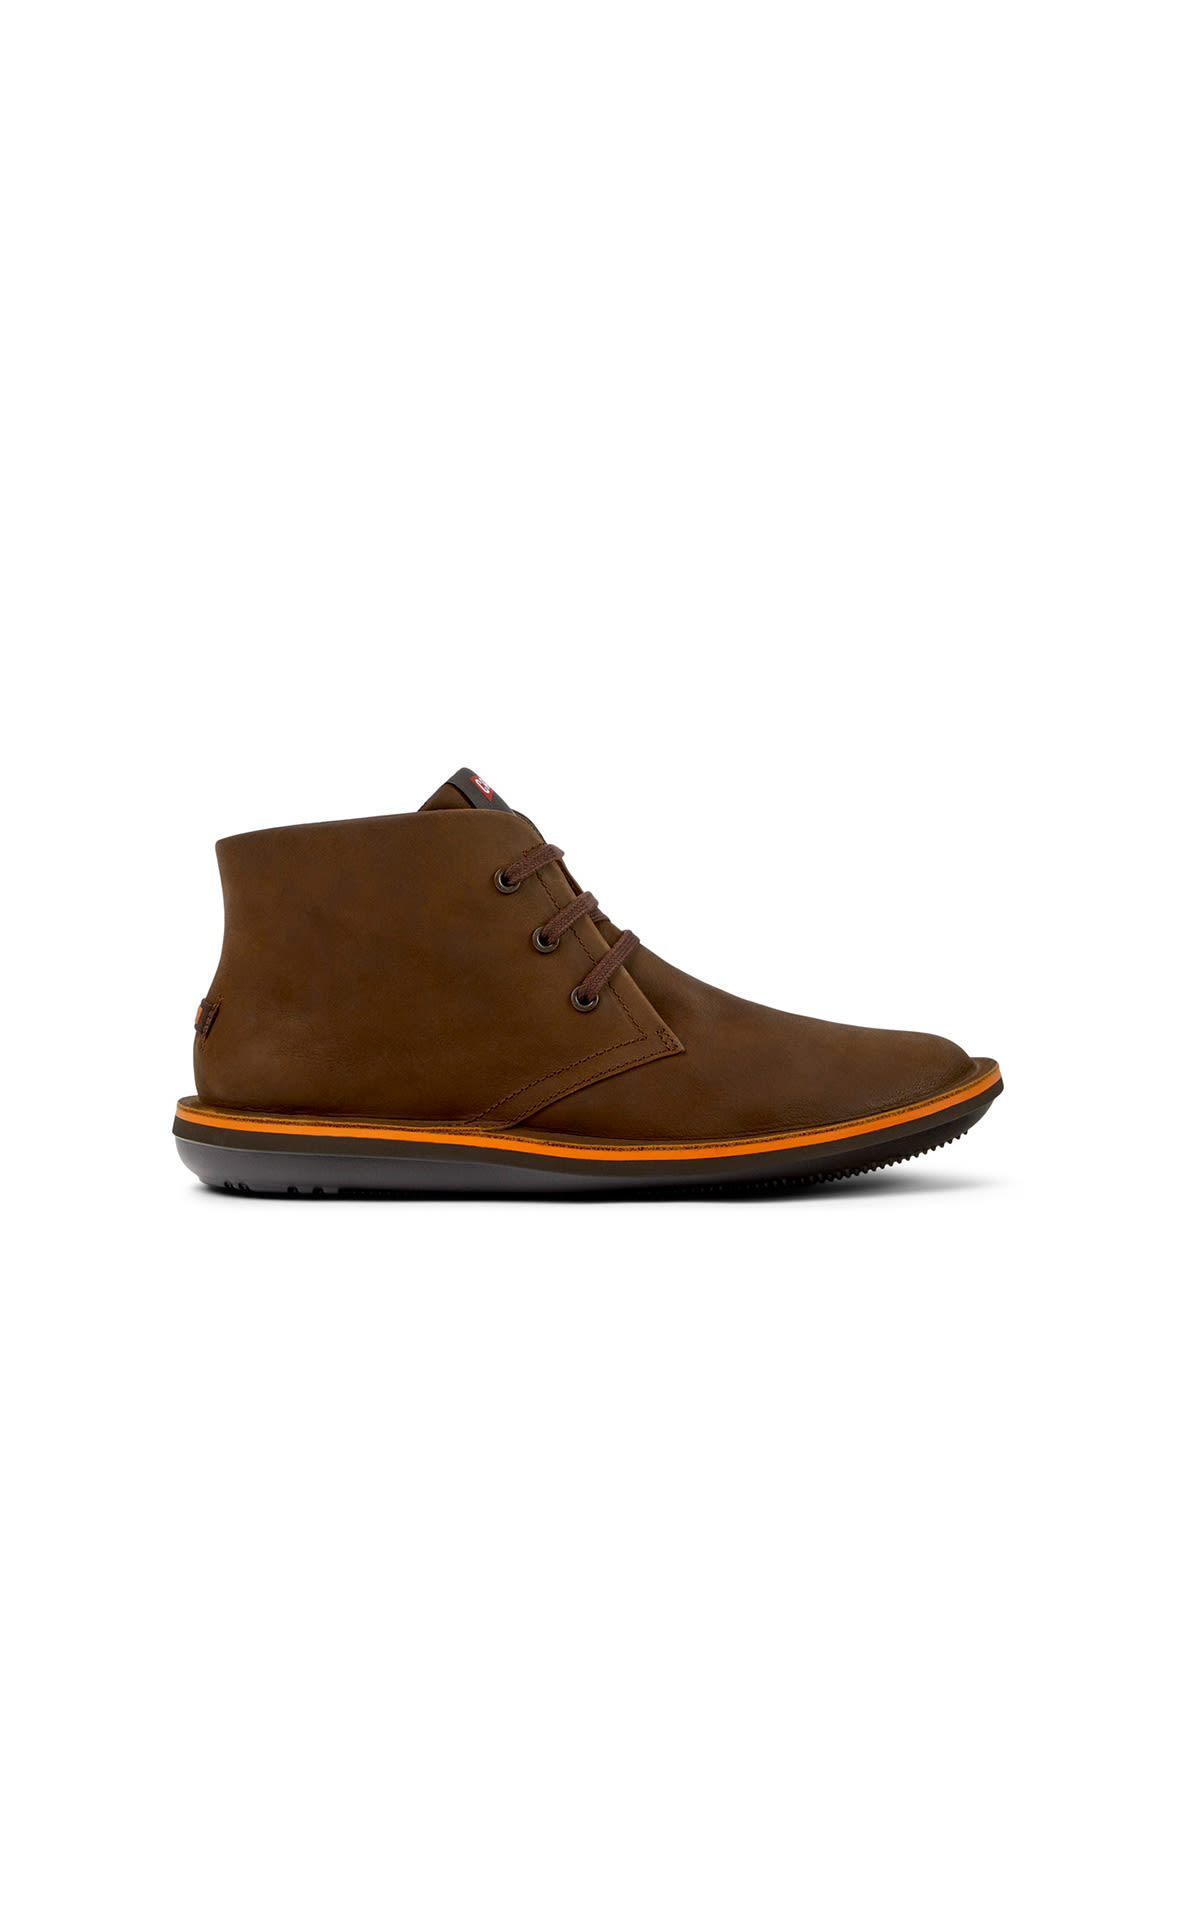 Men's brown leather ankle boots camper